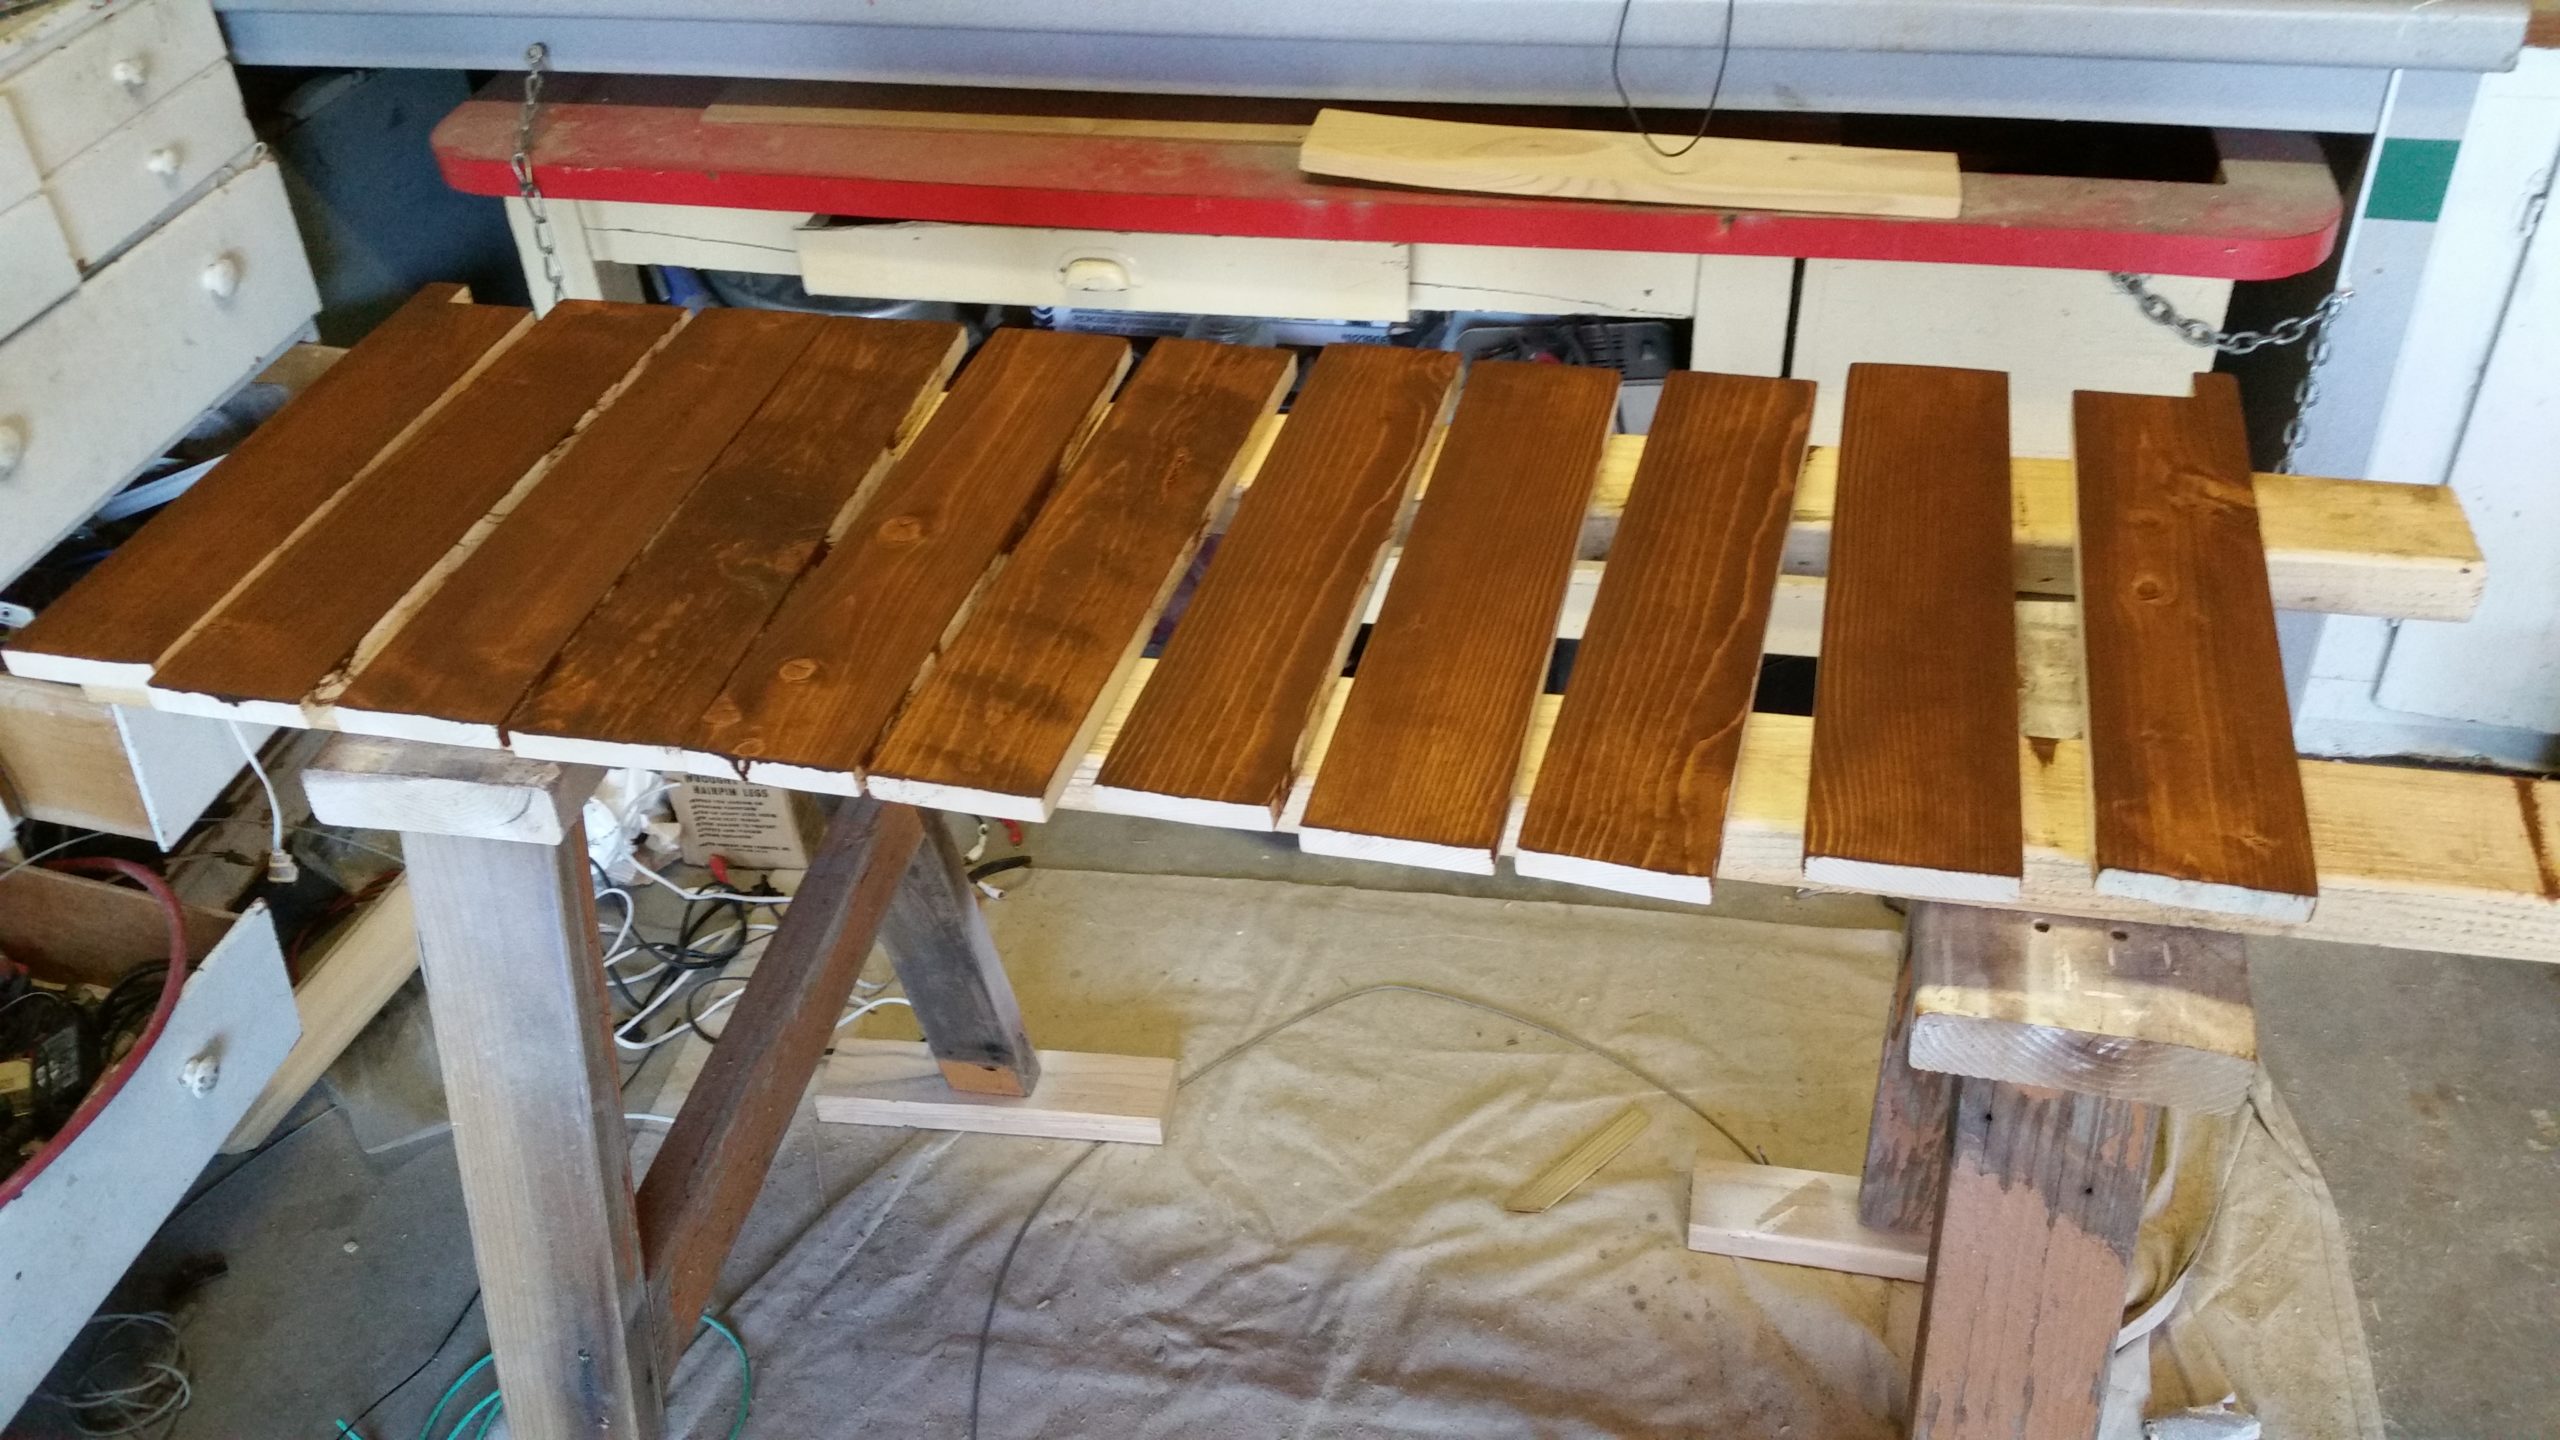 Staining the bench top